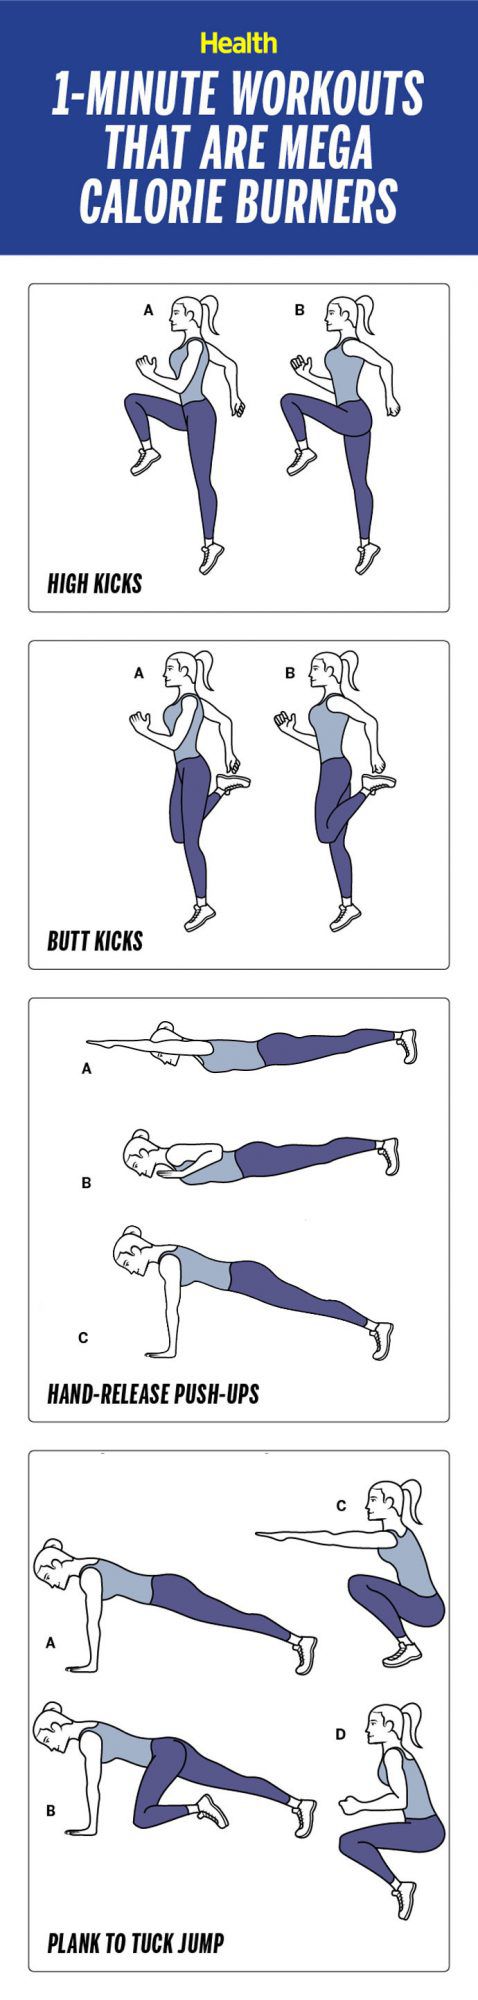 best-one-minute-workouts